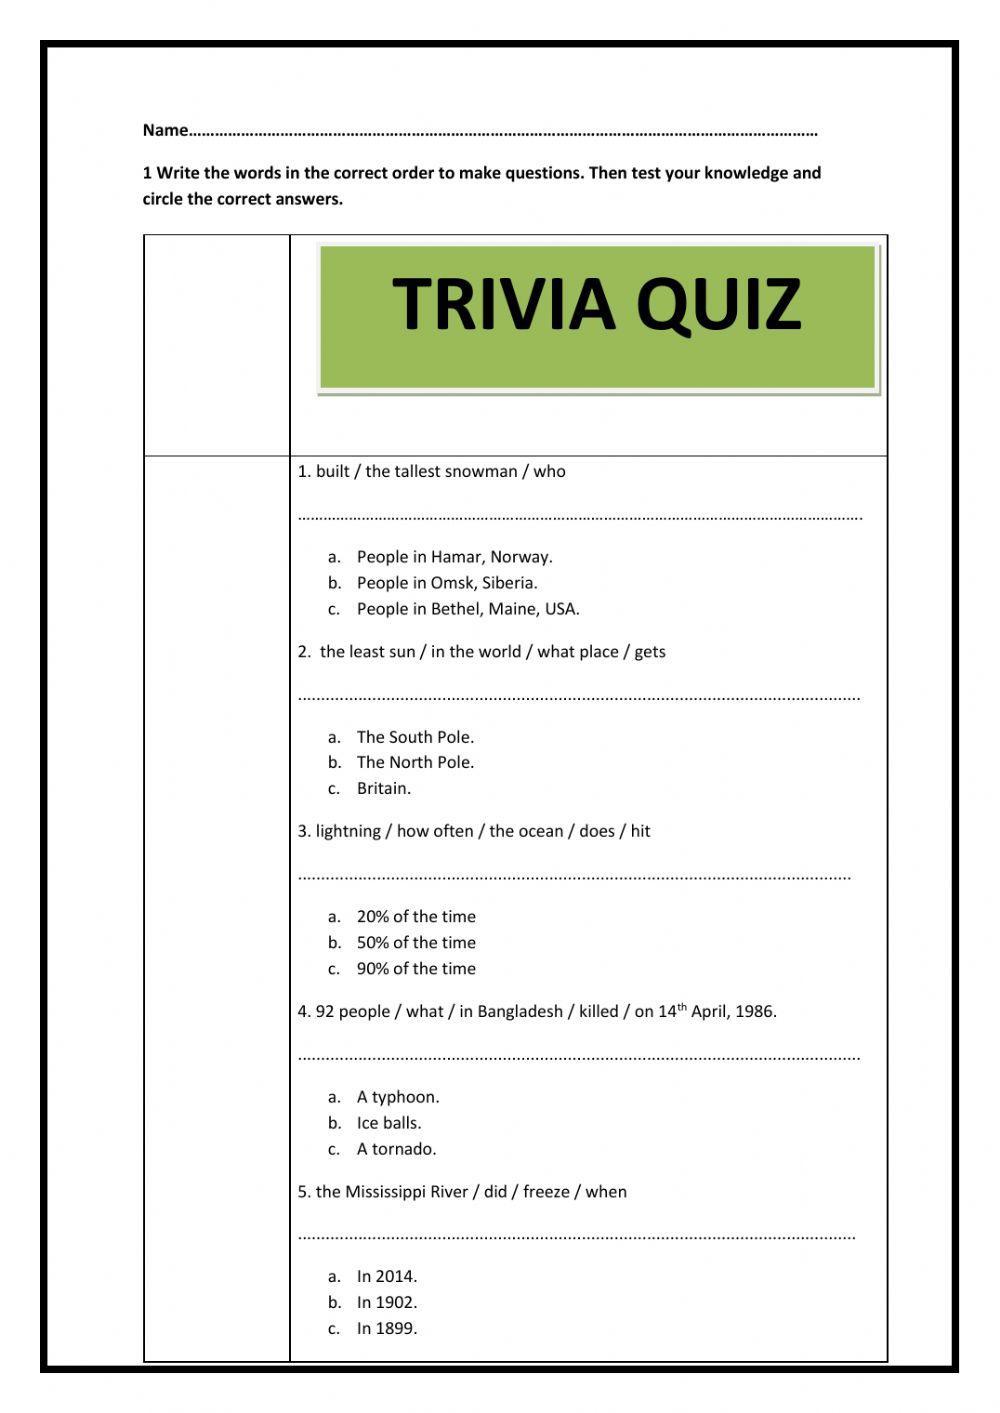 Subject- Object questions trivia